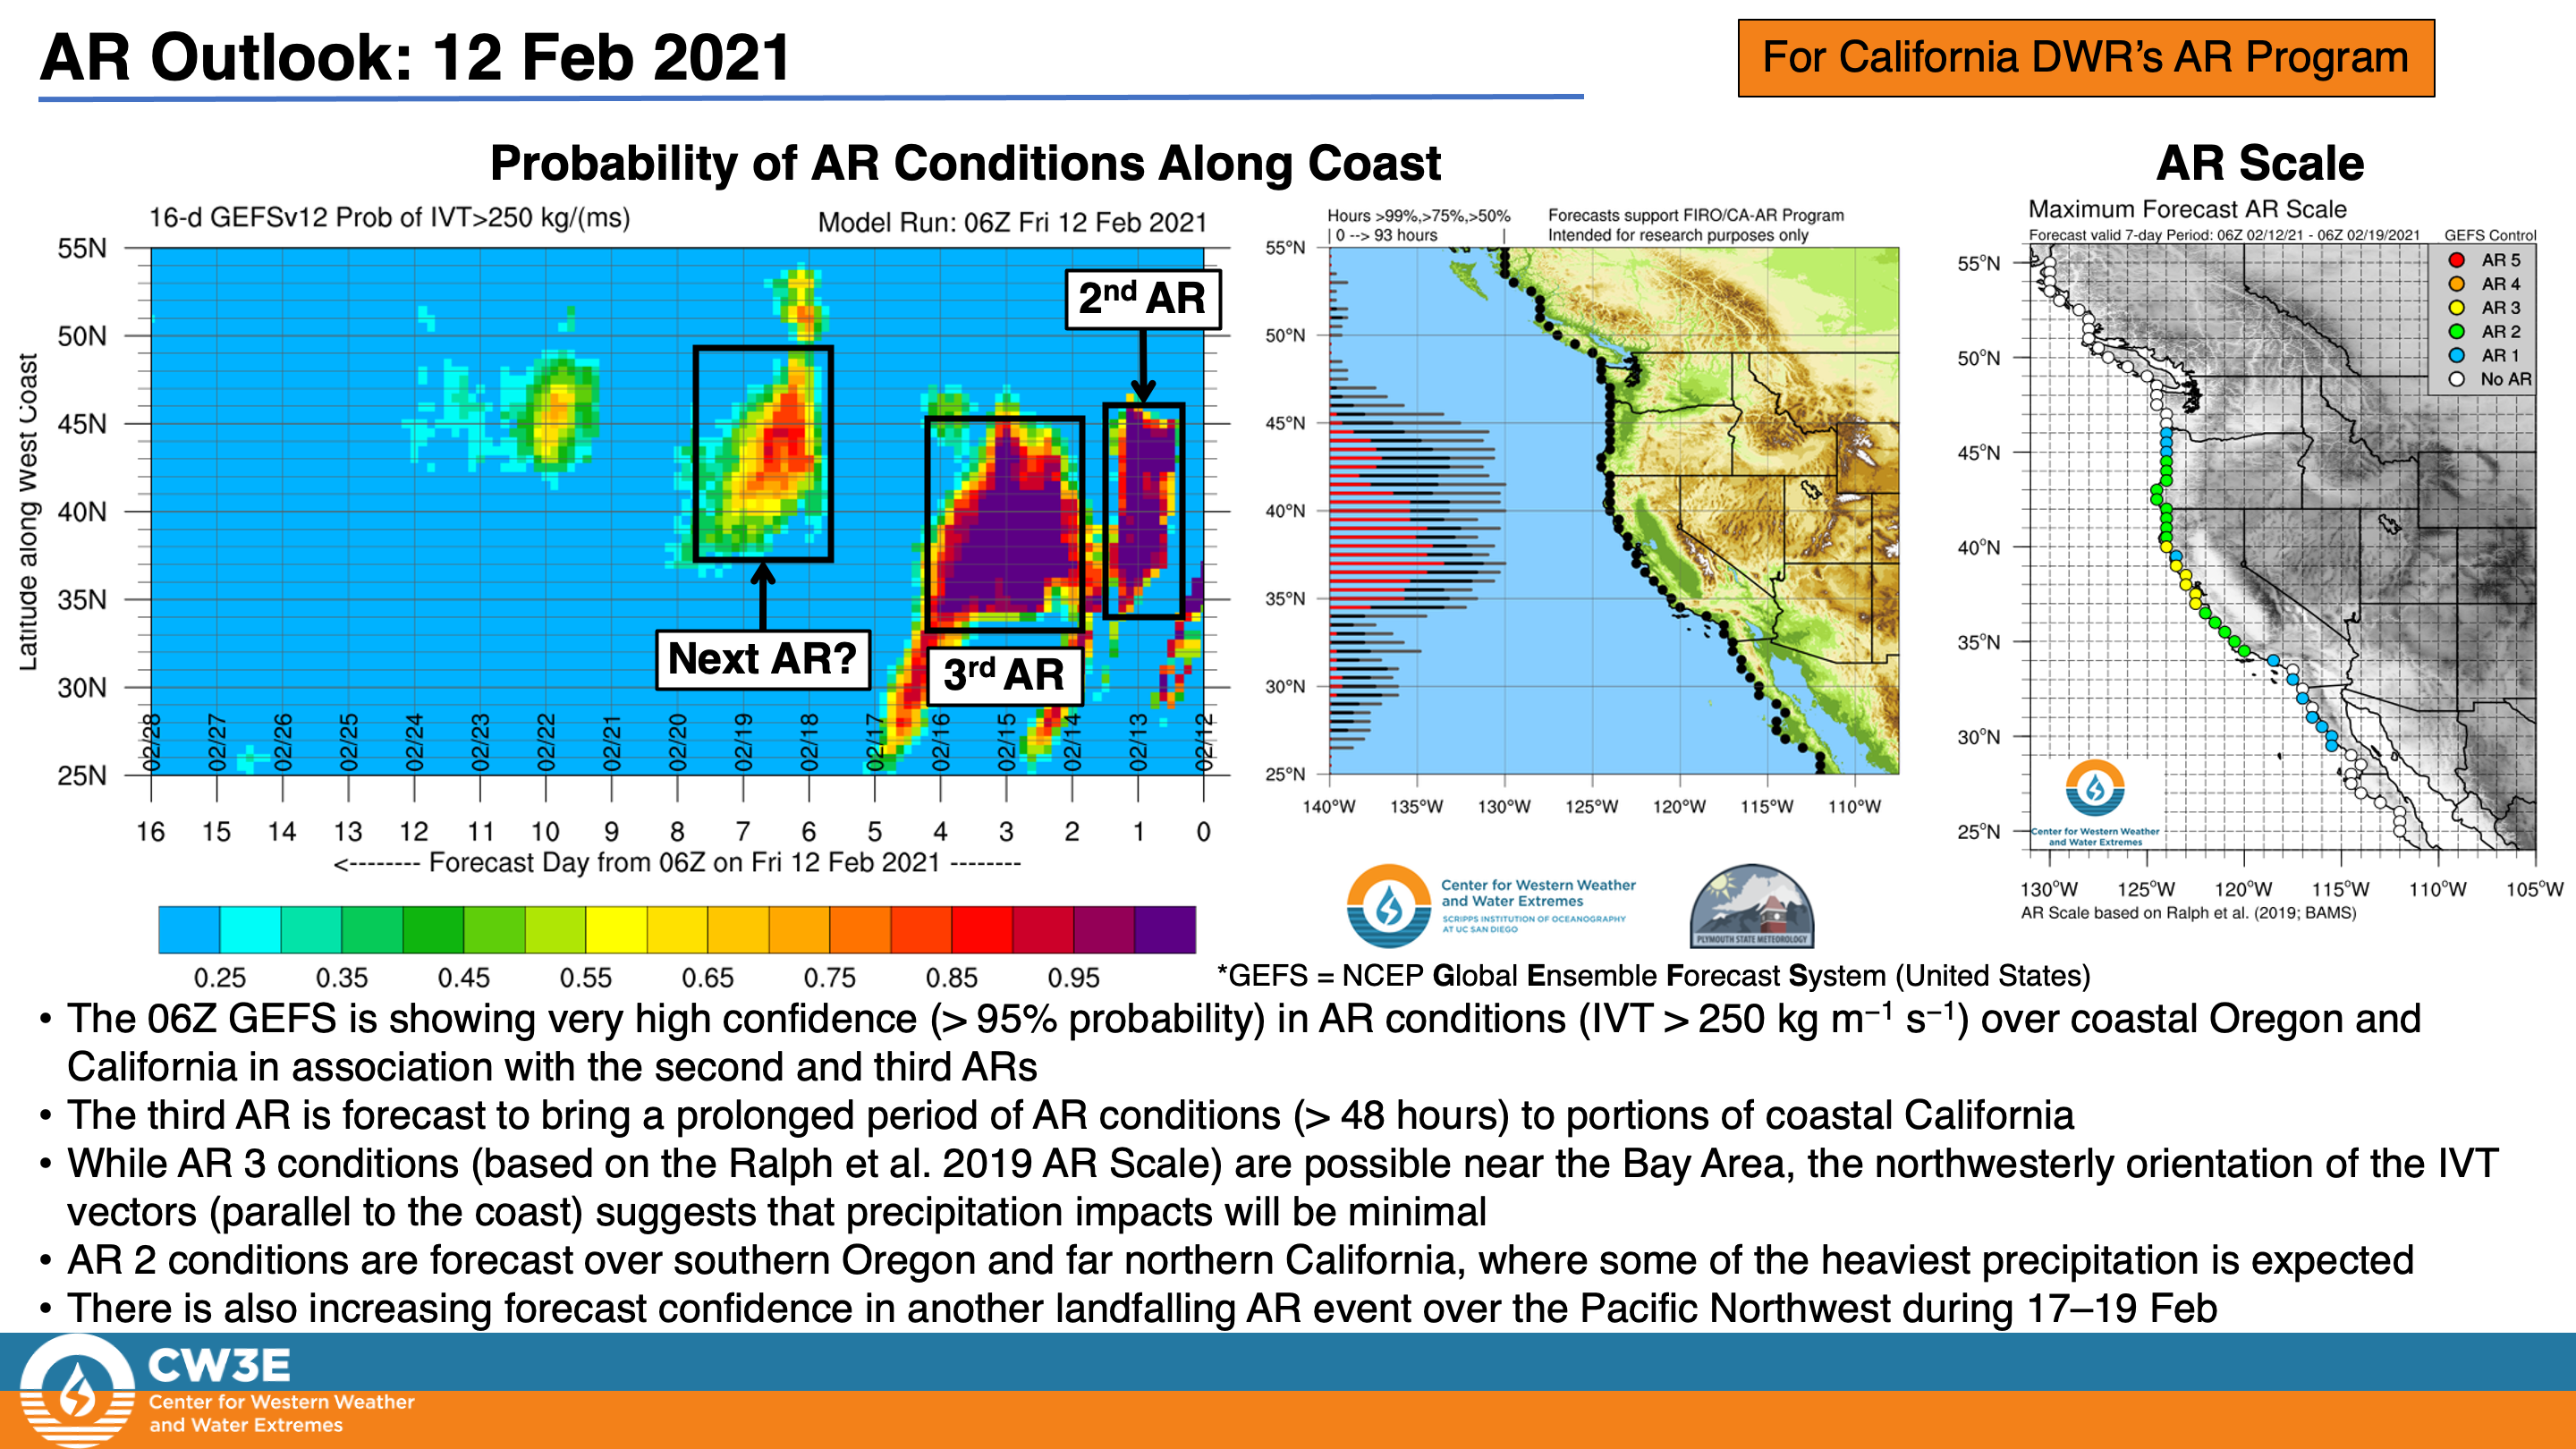 Cw3e Ar Update 12 February 21 Outlook Center For Western Weather And Water Extremes